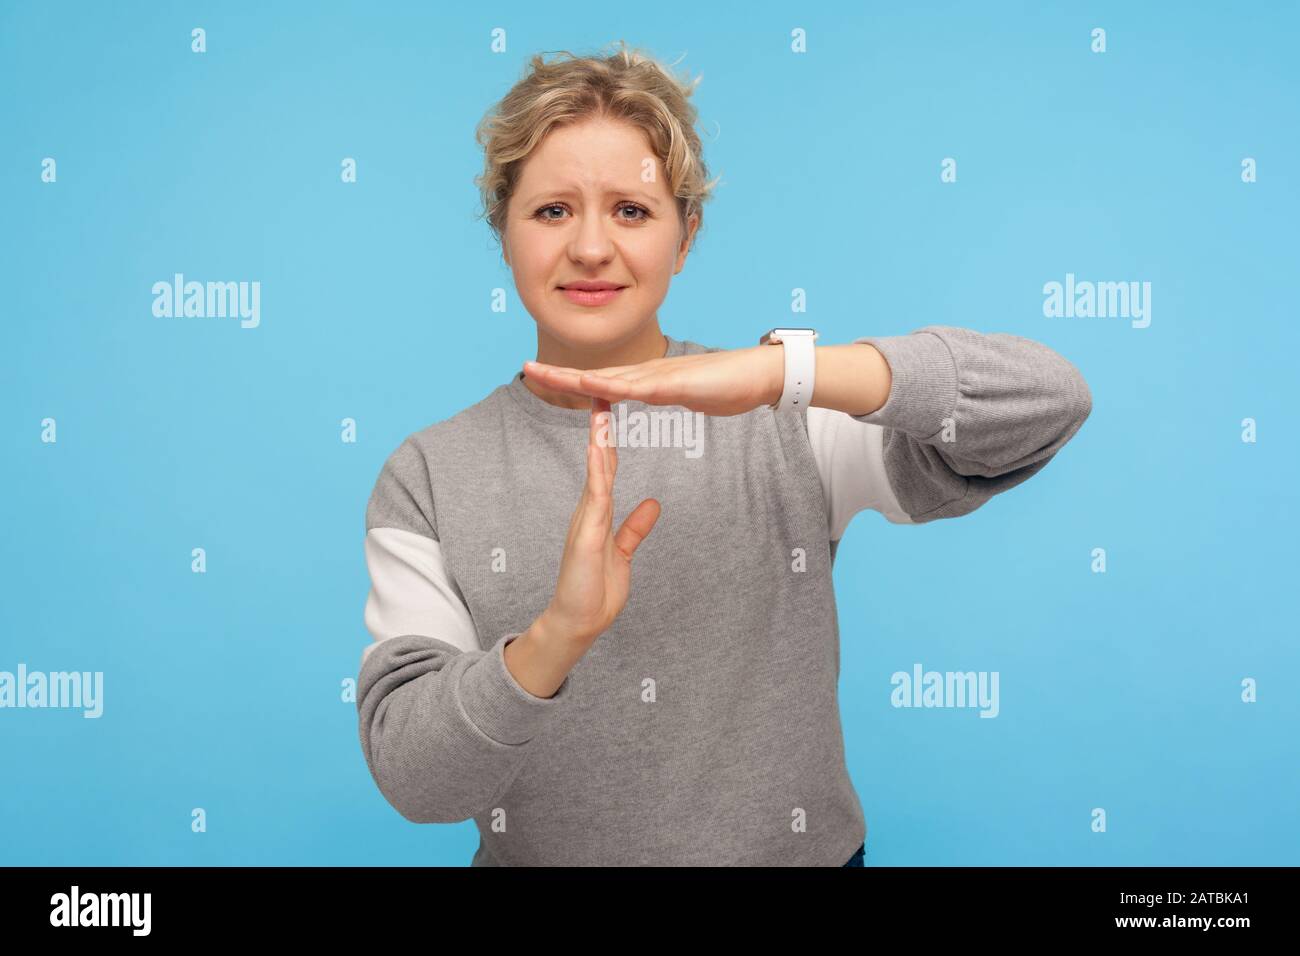 Frustrated woman with short curly hair in grey sweatshirt feeling tired and overworked, showing timeout gesture, need more time, missing deadline. ind Stock Photo